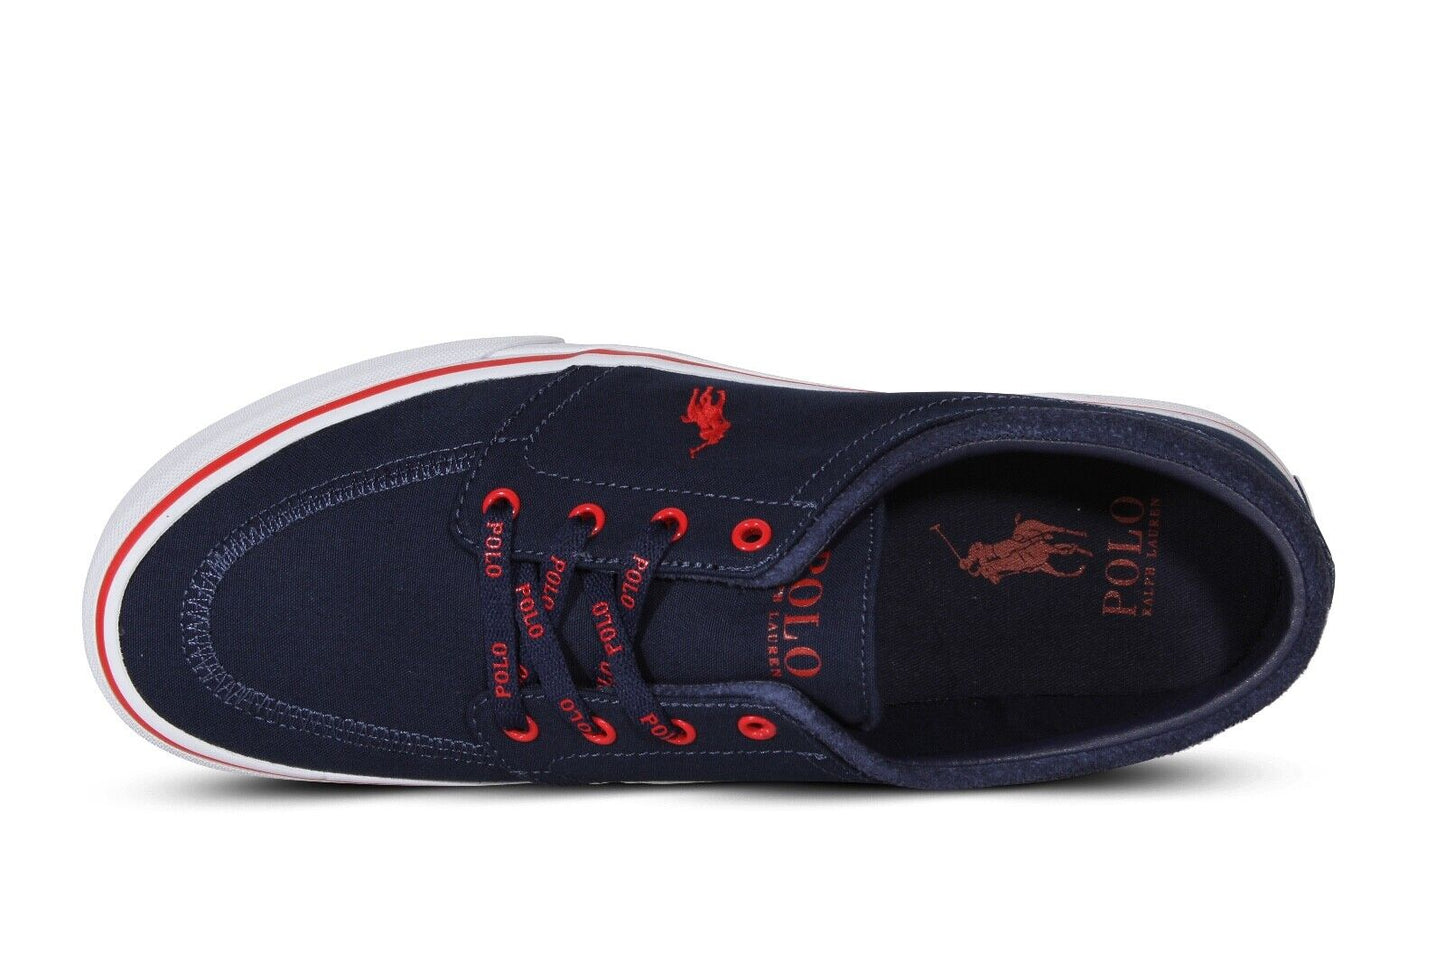 Polo Ralph Lauren Faxon X Men’s Canvas Sneakers in Navy and Red 816841214003